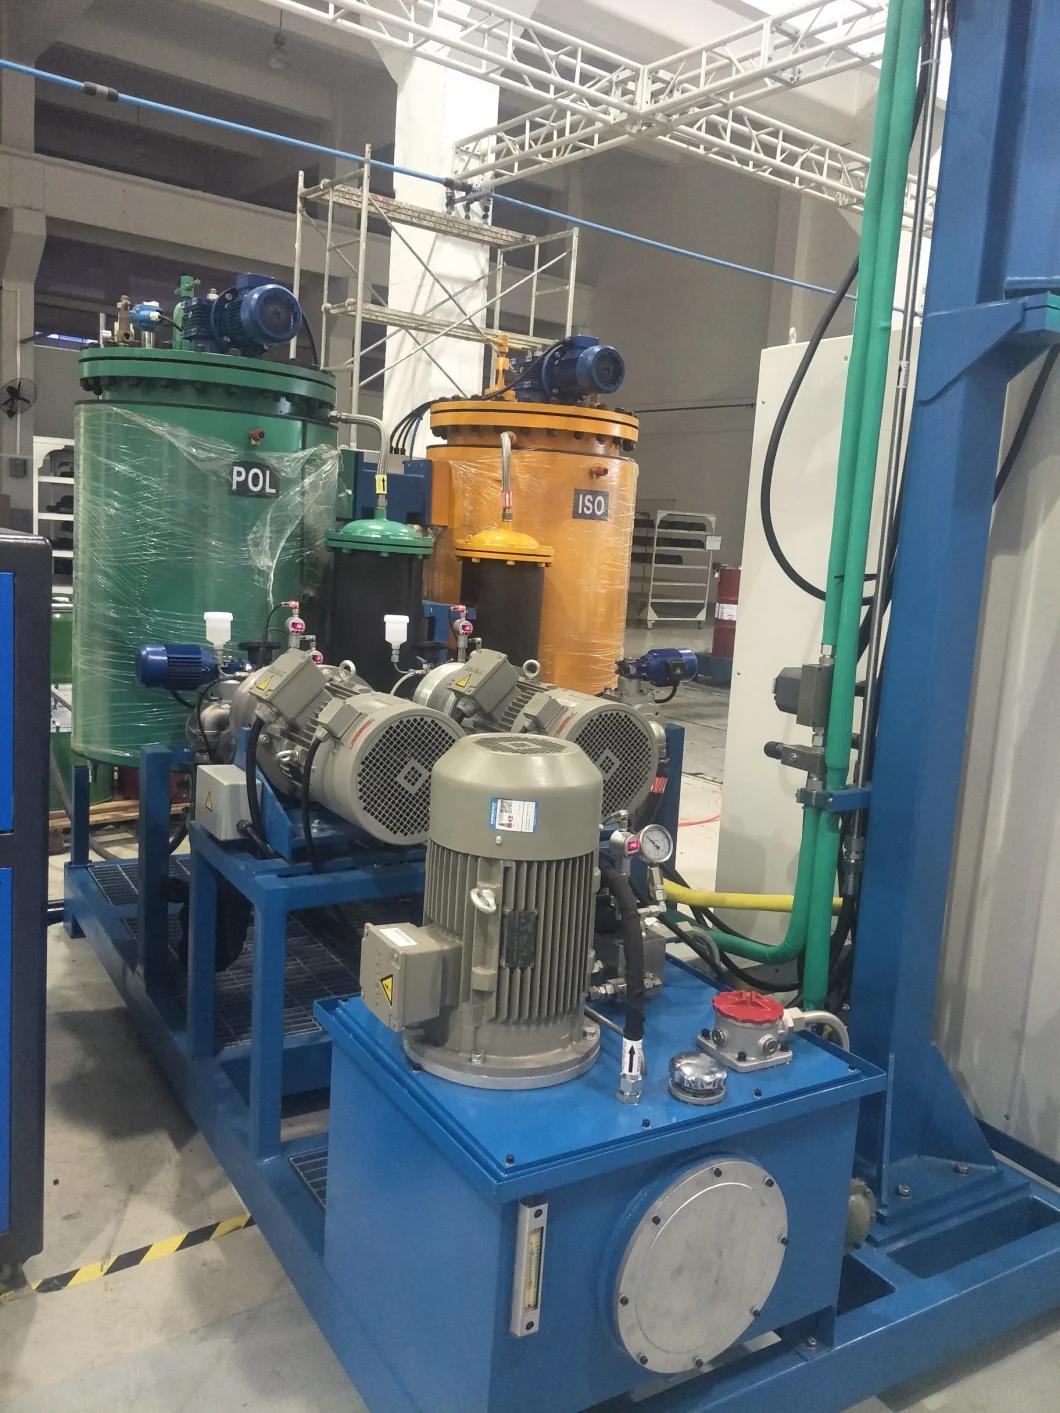 PU Foam Injection Machine for Refrigerator Production Line